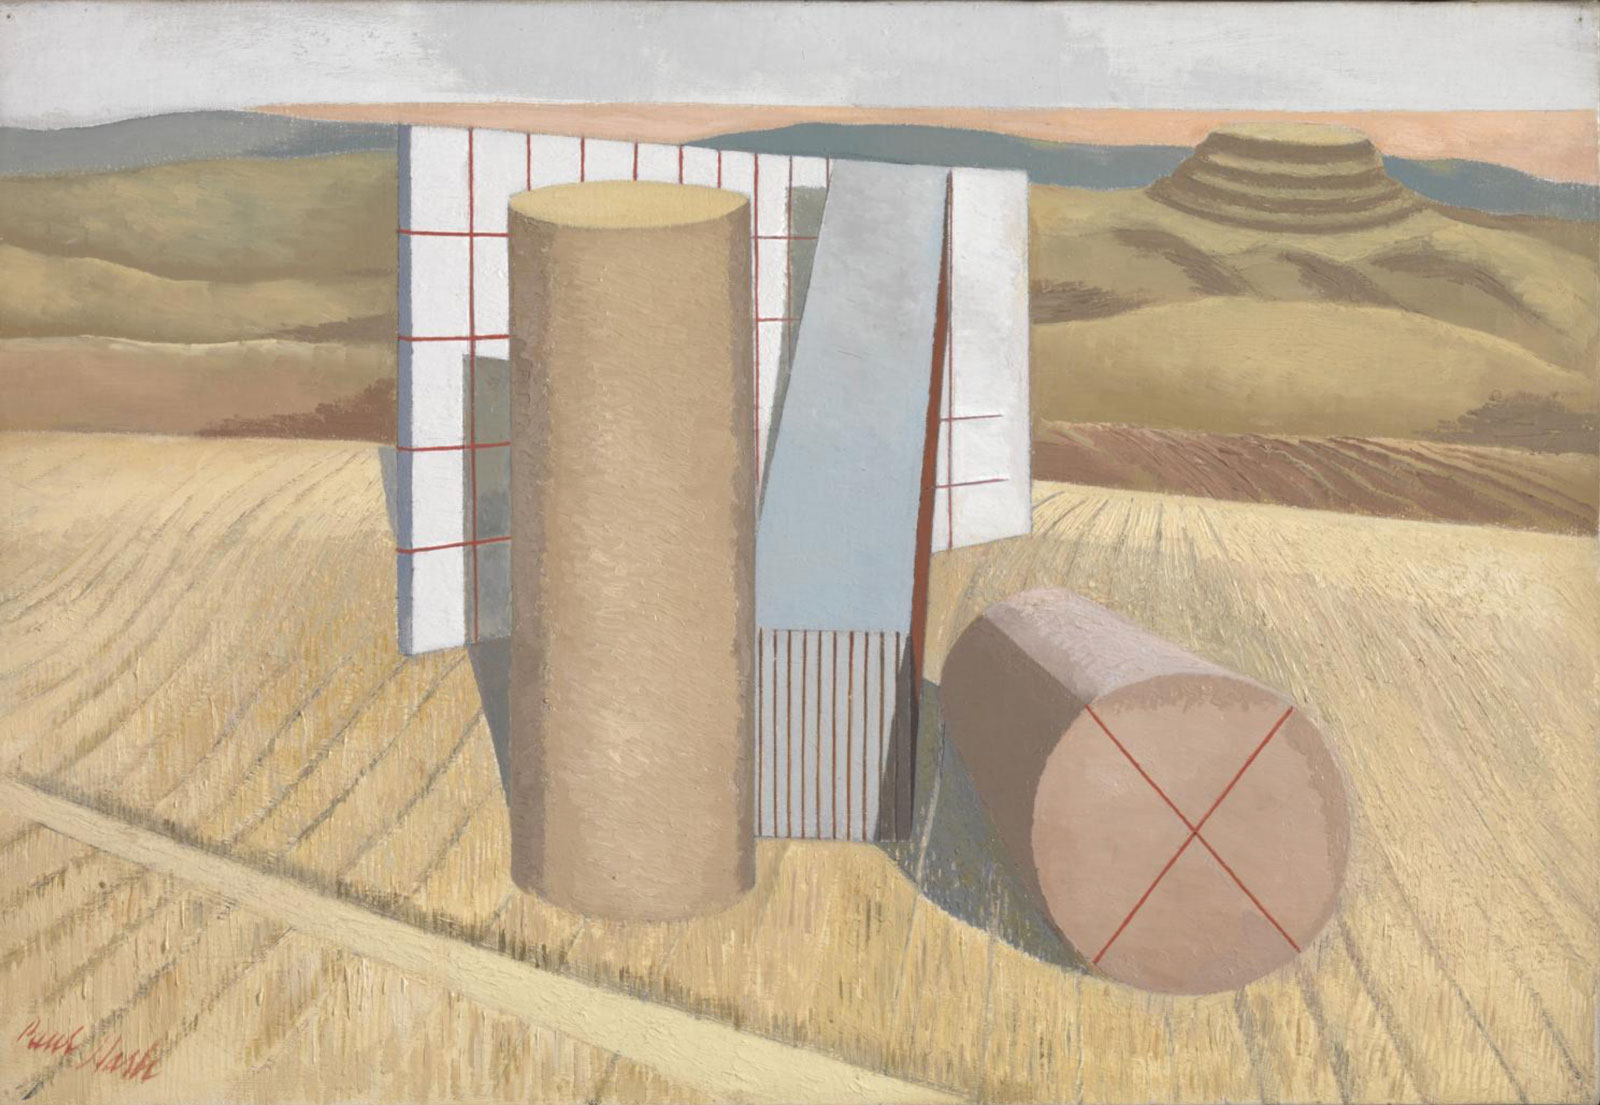 Paul Nash: Equivalents for the Megaliths, 1935